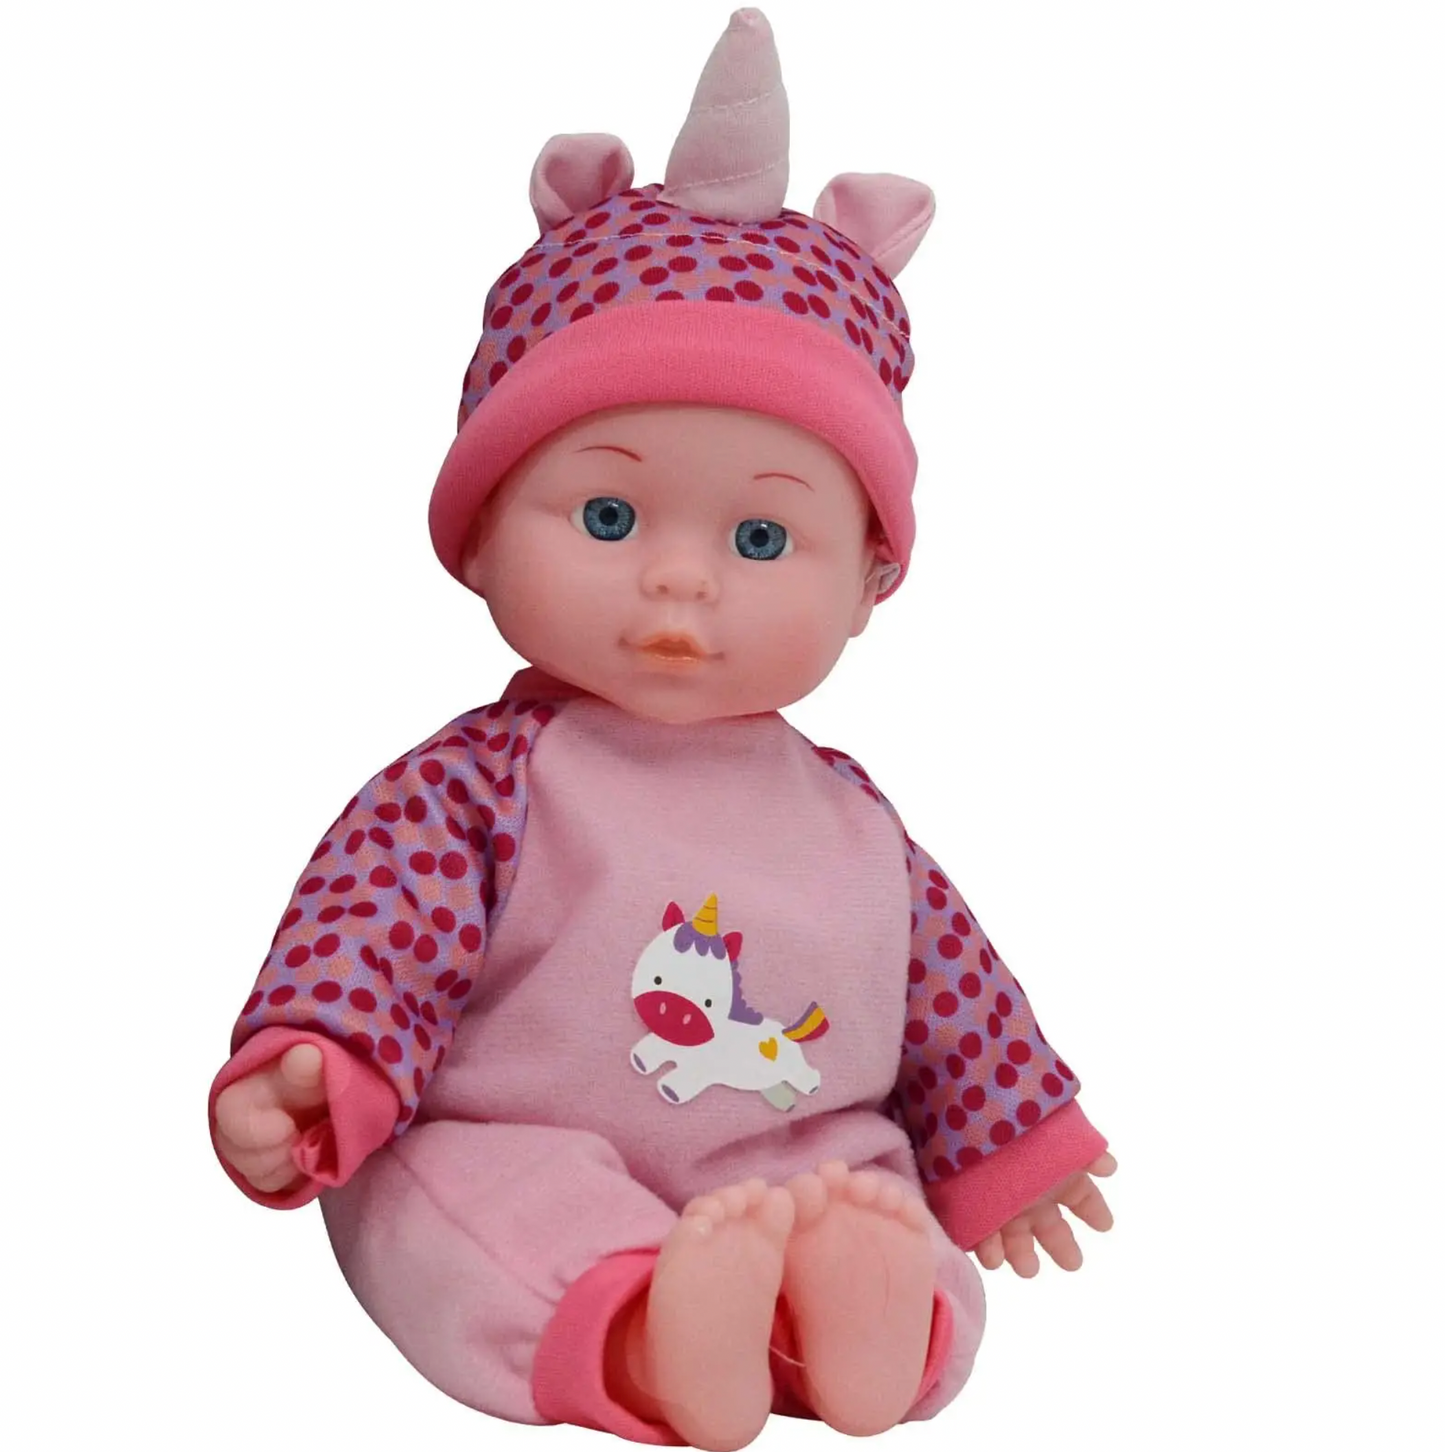 12" SOFT BODY TALK CRY AND SING INTERACTIVE BABY DOLL UNICORN